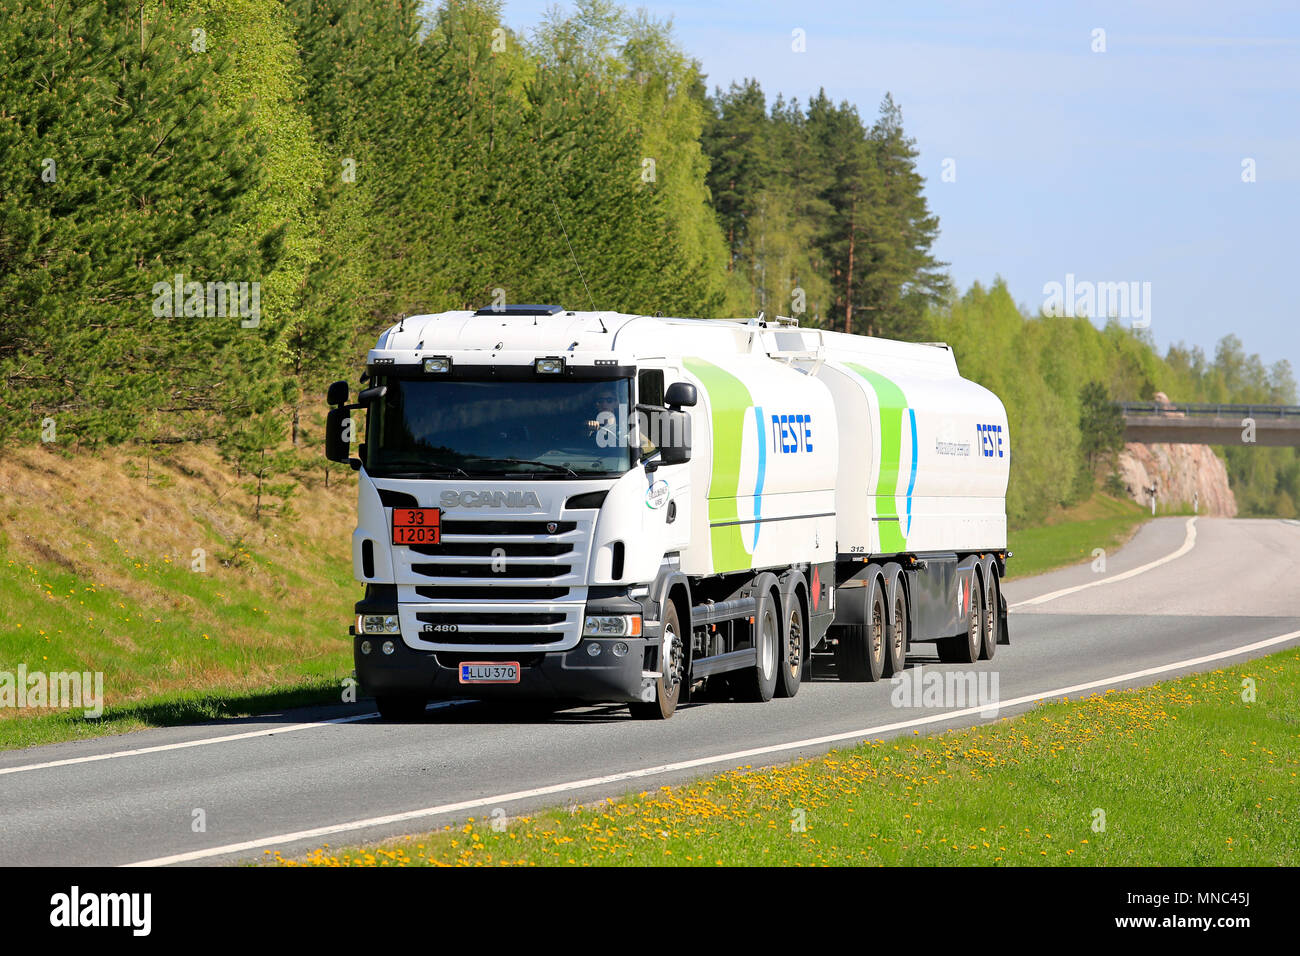 White Scania fuel tanker for Neste ADR transport of gasoline on freeway ramp on a beautiful day of early summer. Salo, Finland - May 12, 2018. Stock Photo